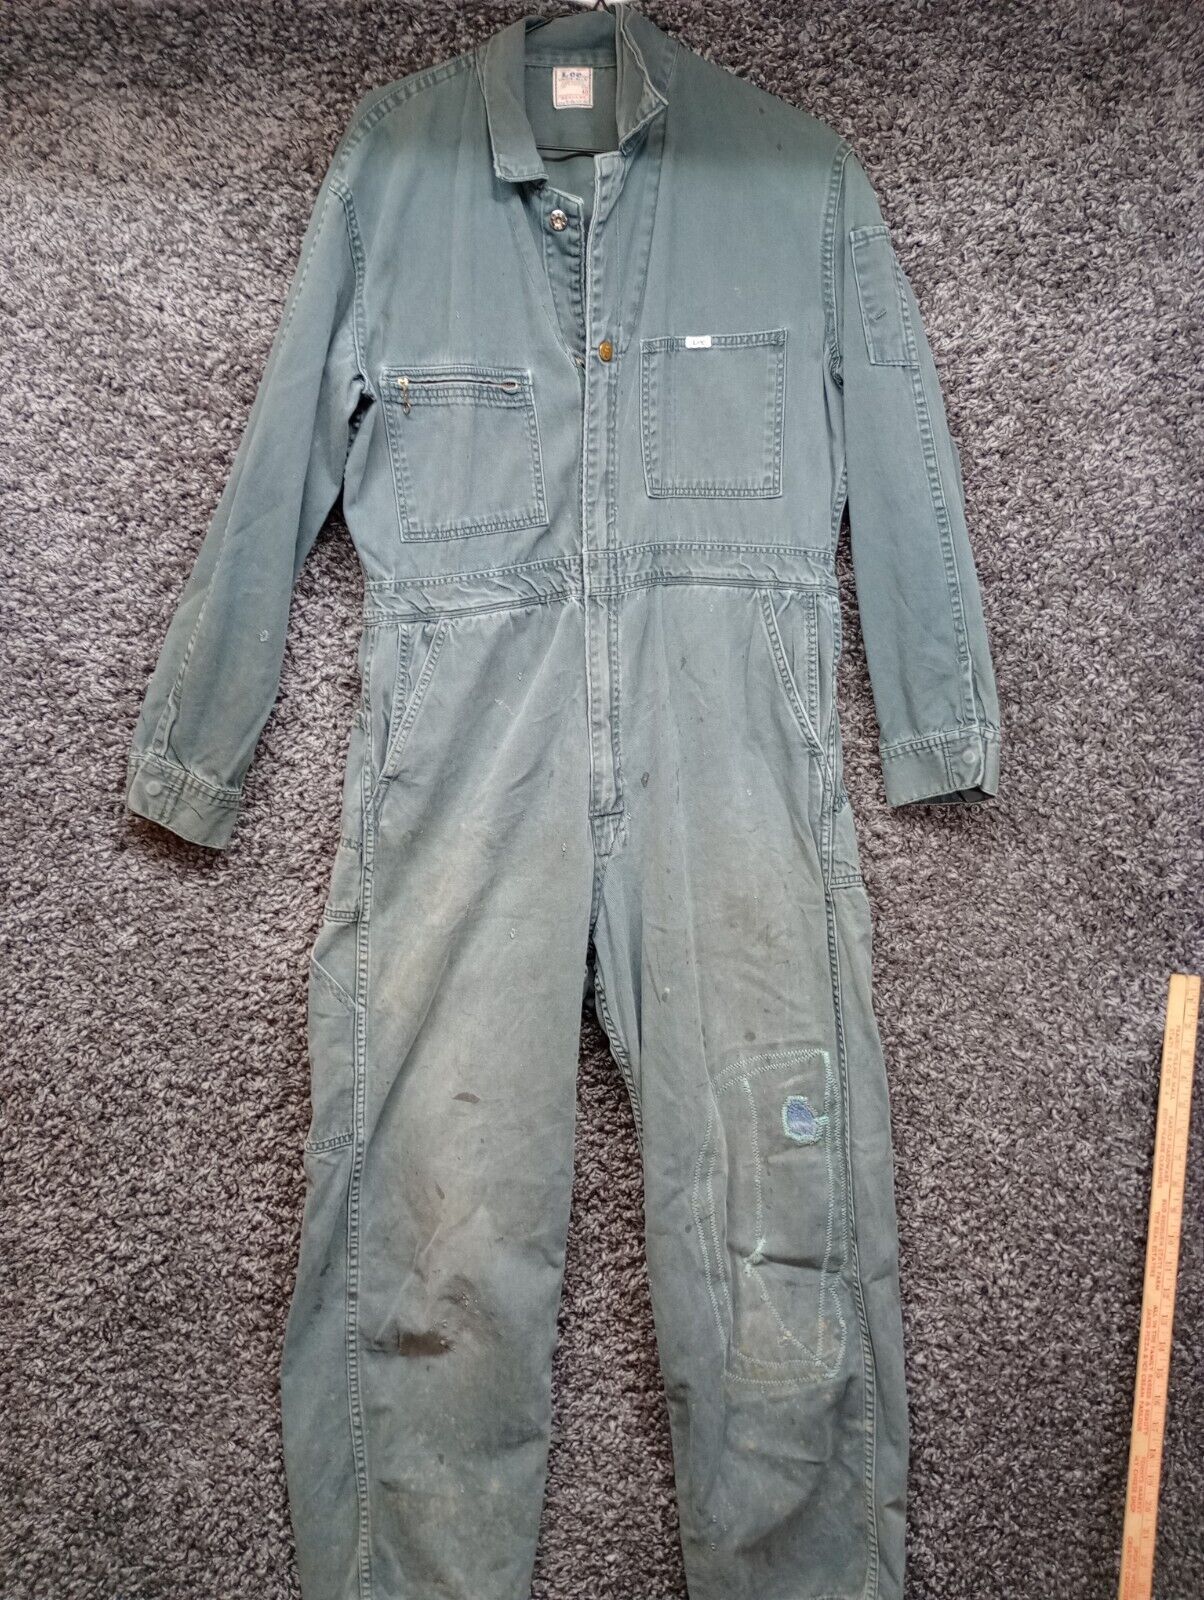 Vintage Rare Lee Union Alls Sanforized Coveralls Workwear 40 Green Patched